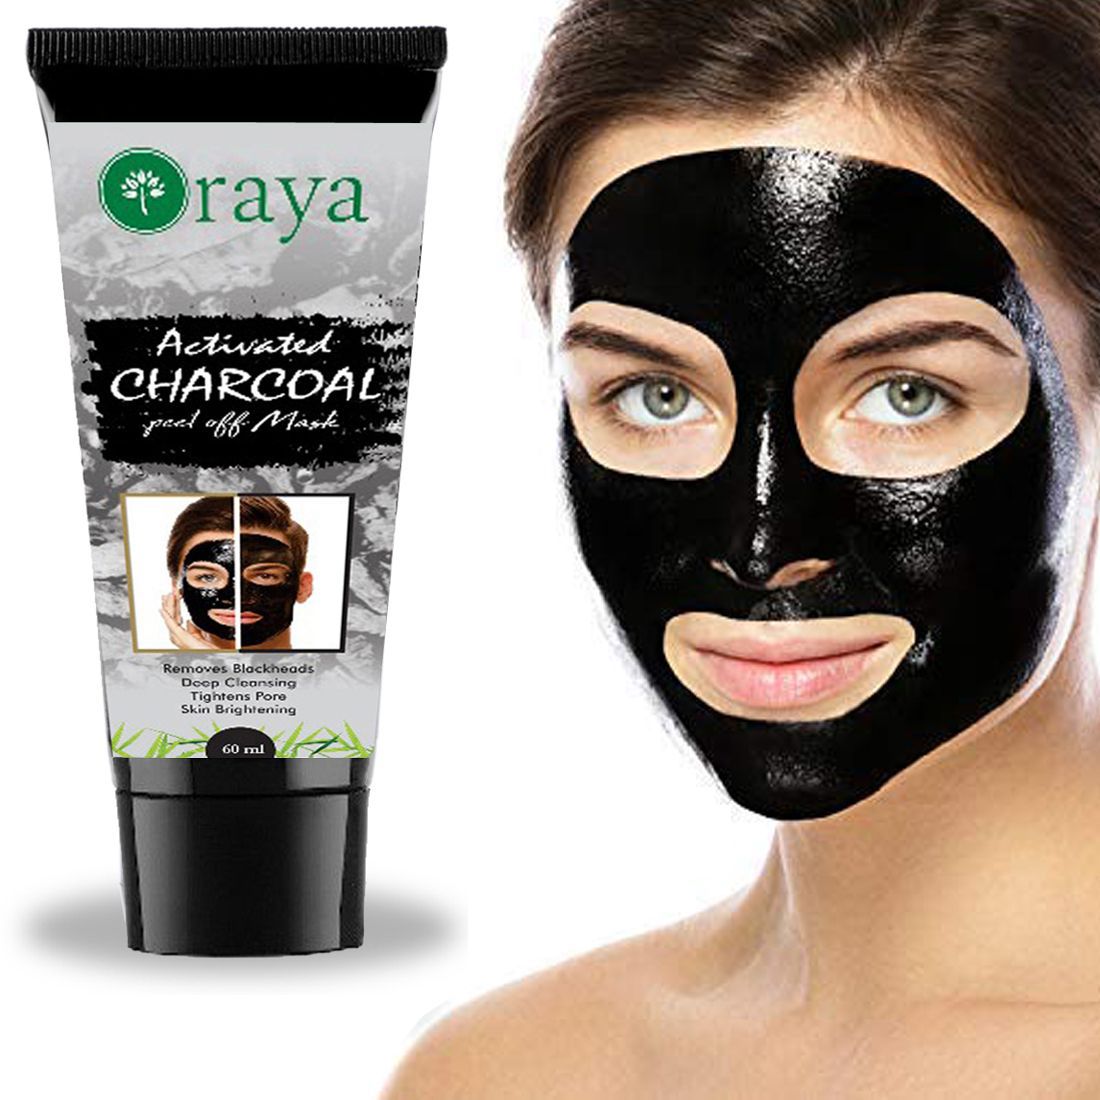 Oraya Charcoal Blackhead Removal Mask And For Charcoal Face Peel Off